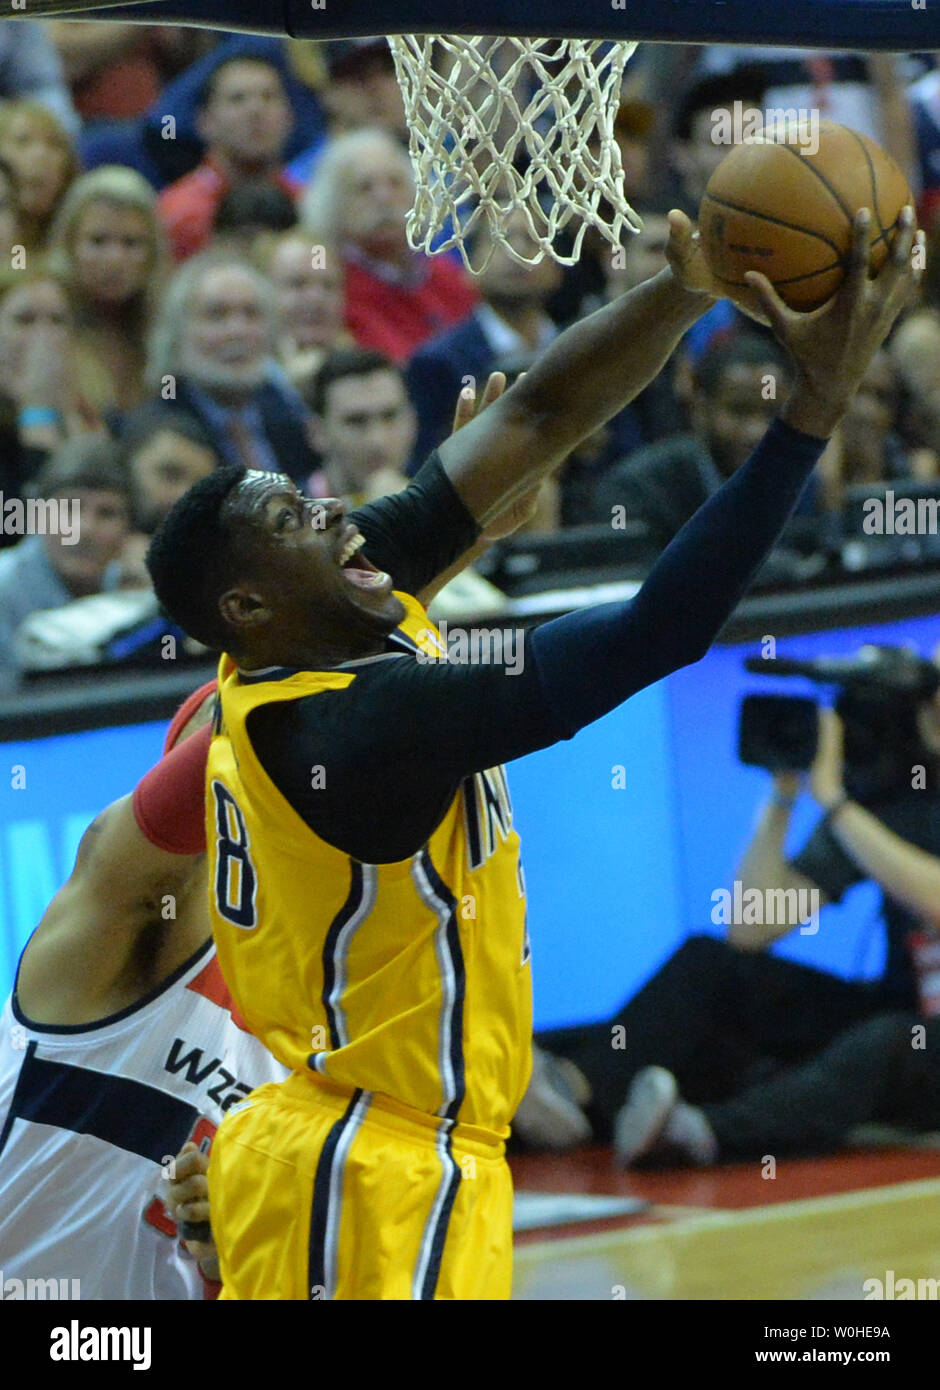 Indiana Pacers center Ian Mahinmi (28) drives to the basket against the Washington Wizards during the 1st half of game six of the Eastern Conference Semifinals at the Verizon Center in Washington, D.C. on May 15, 2014. UPI/Kevin Dietsch Stock Photo